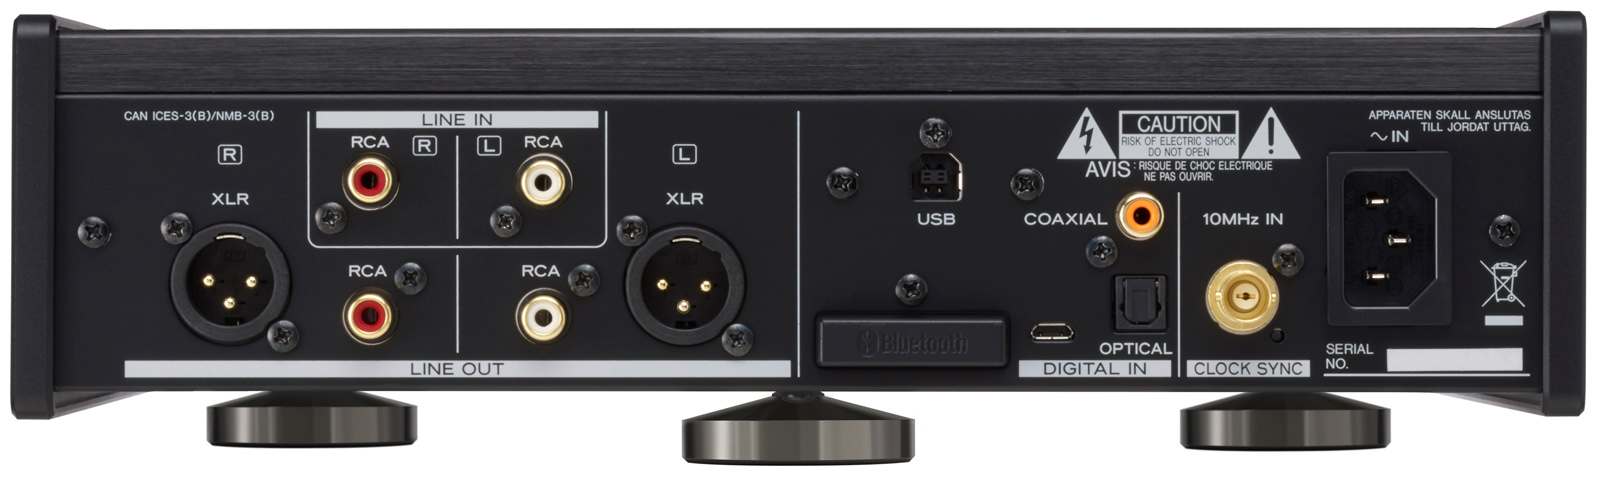 UD-505-X | FEATURES | TEAC | International Website| | FEATURES